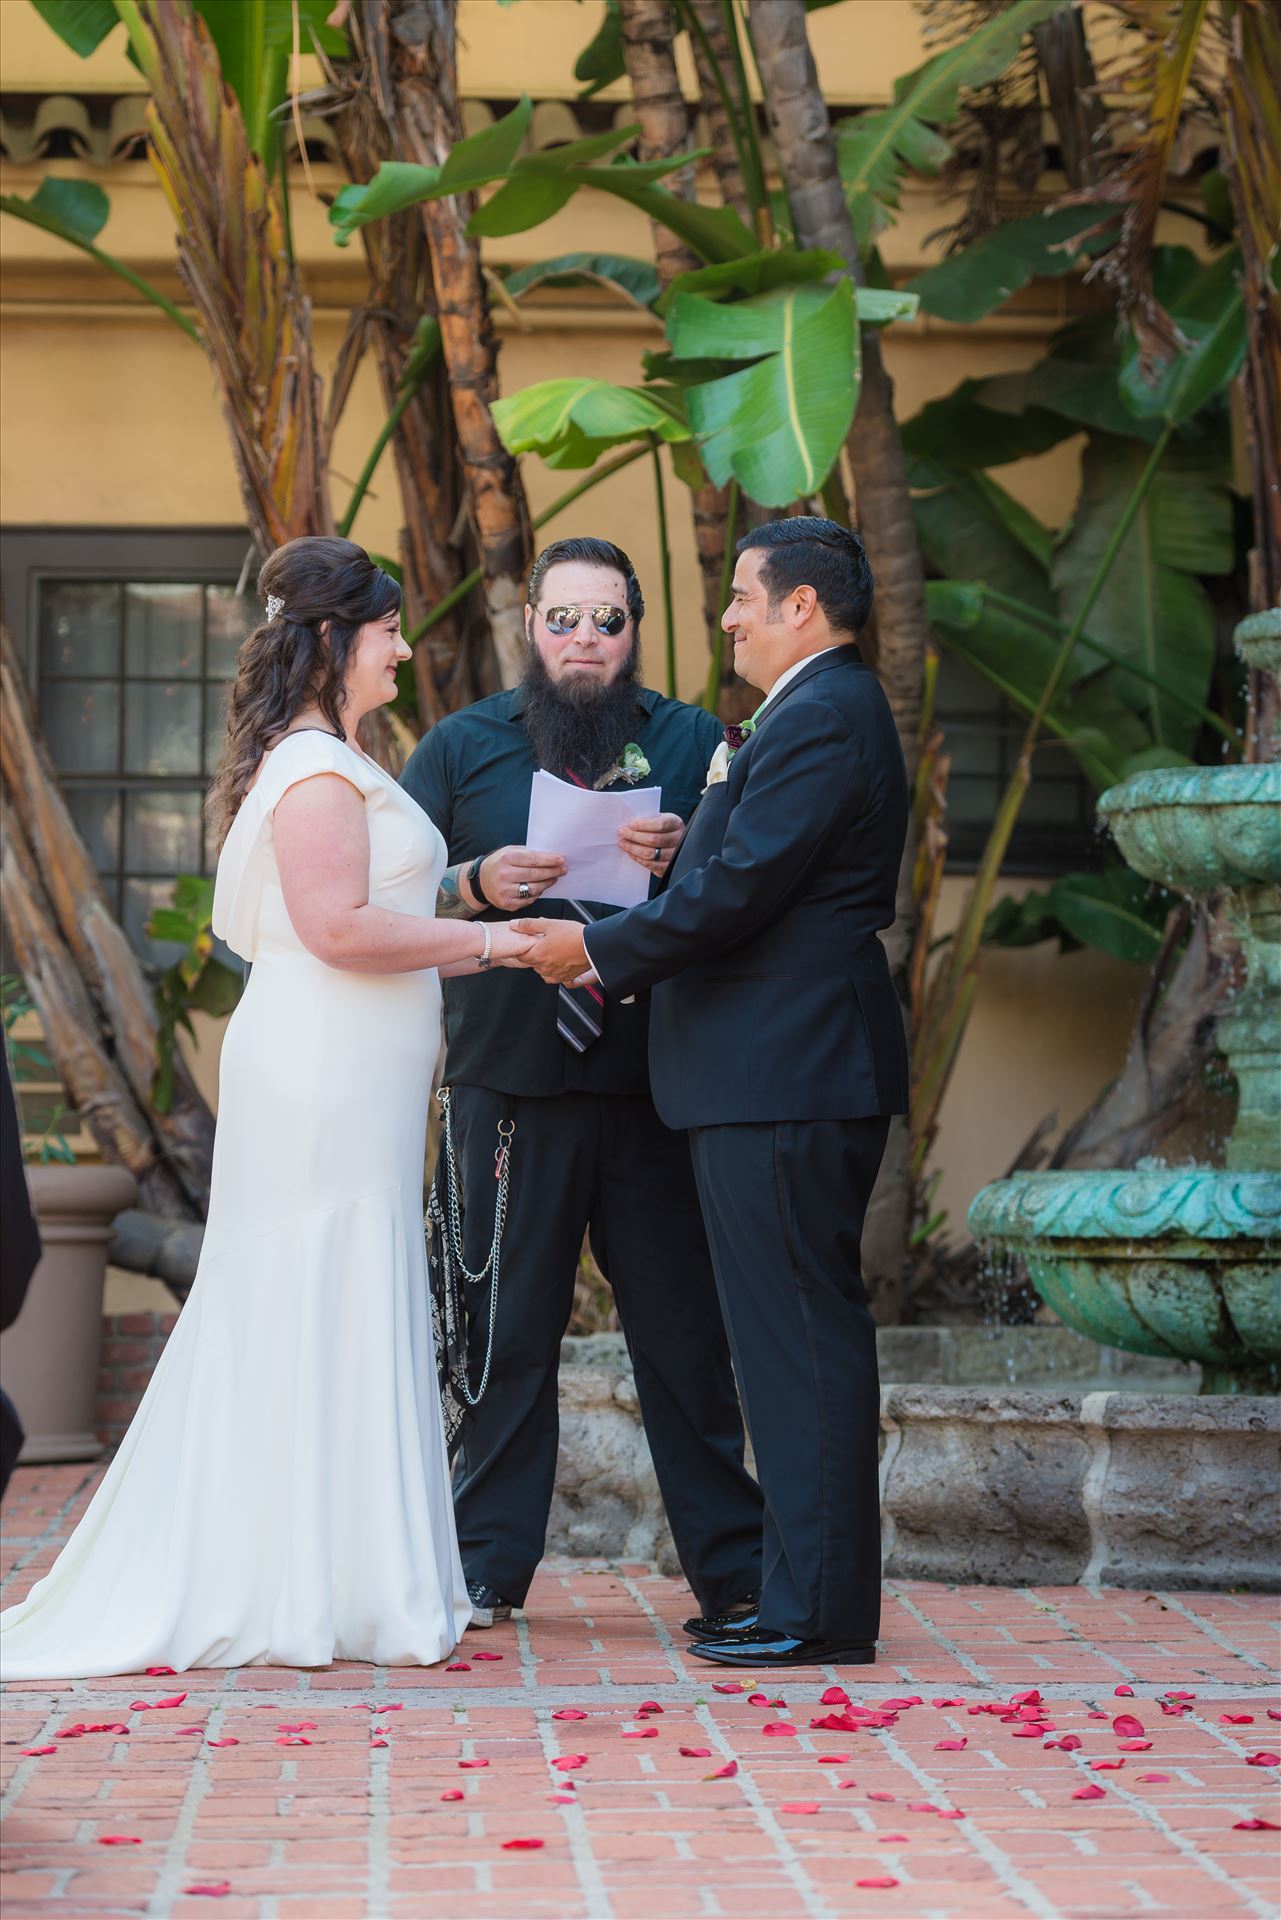 Mary and Alejandro 29 - Wedding photography at the Historic Santa Maria Inn in Santa Maria, California by Mirror's Edge Photography. Bride and Groom exchange rings in courtyard by Sarah Williams